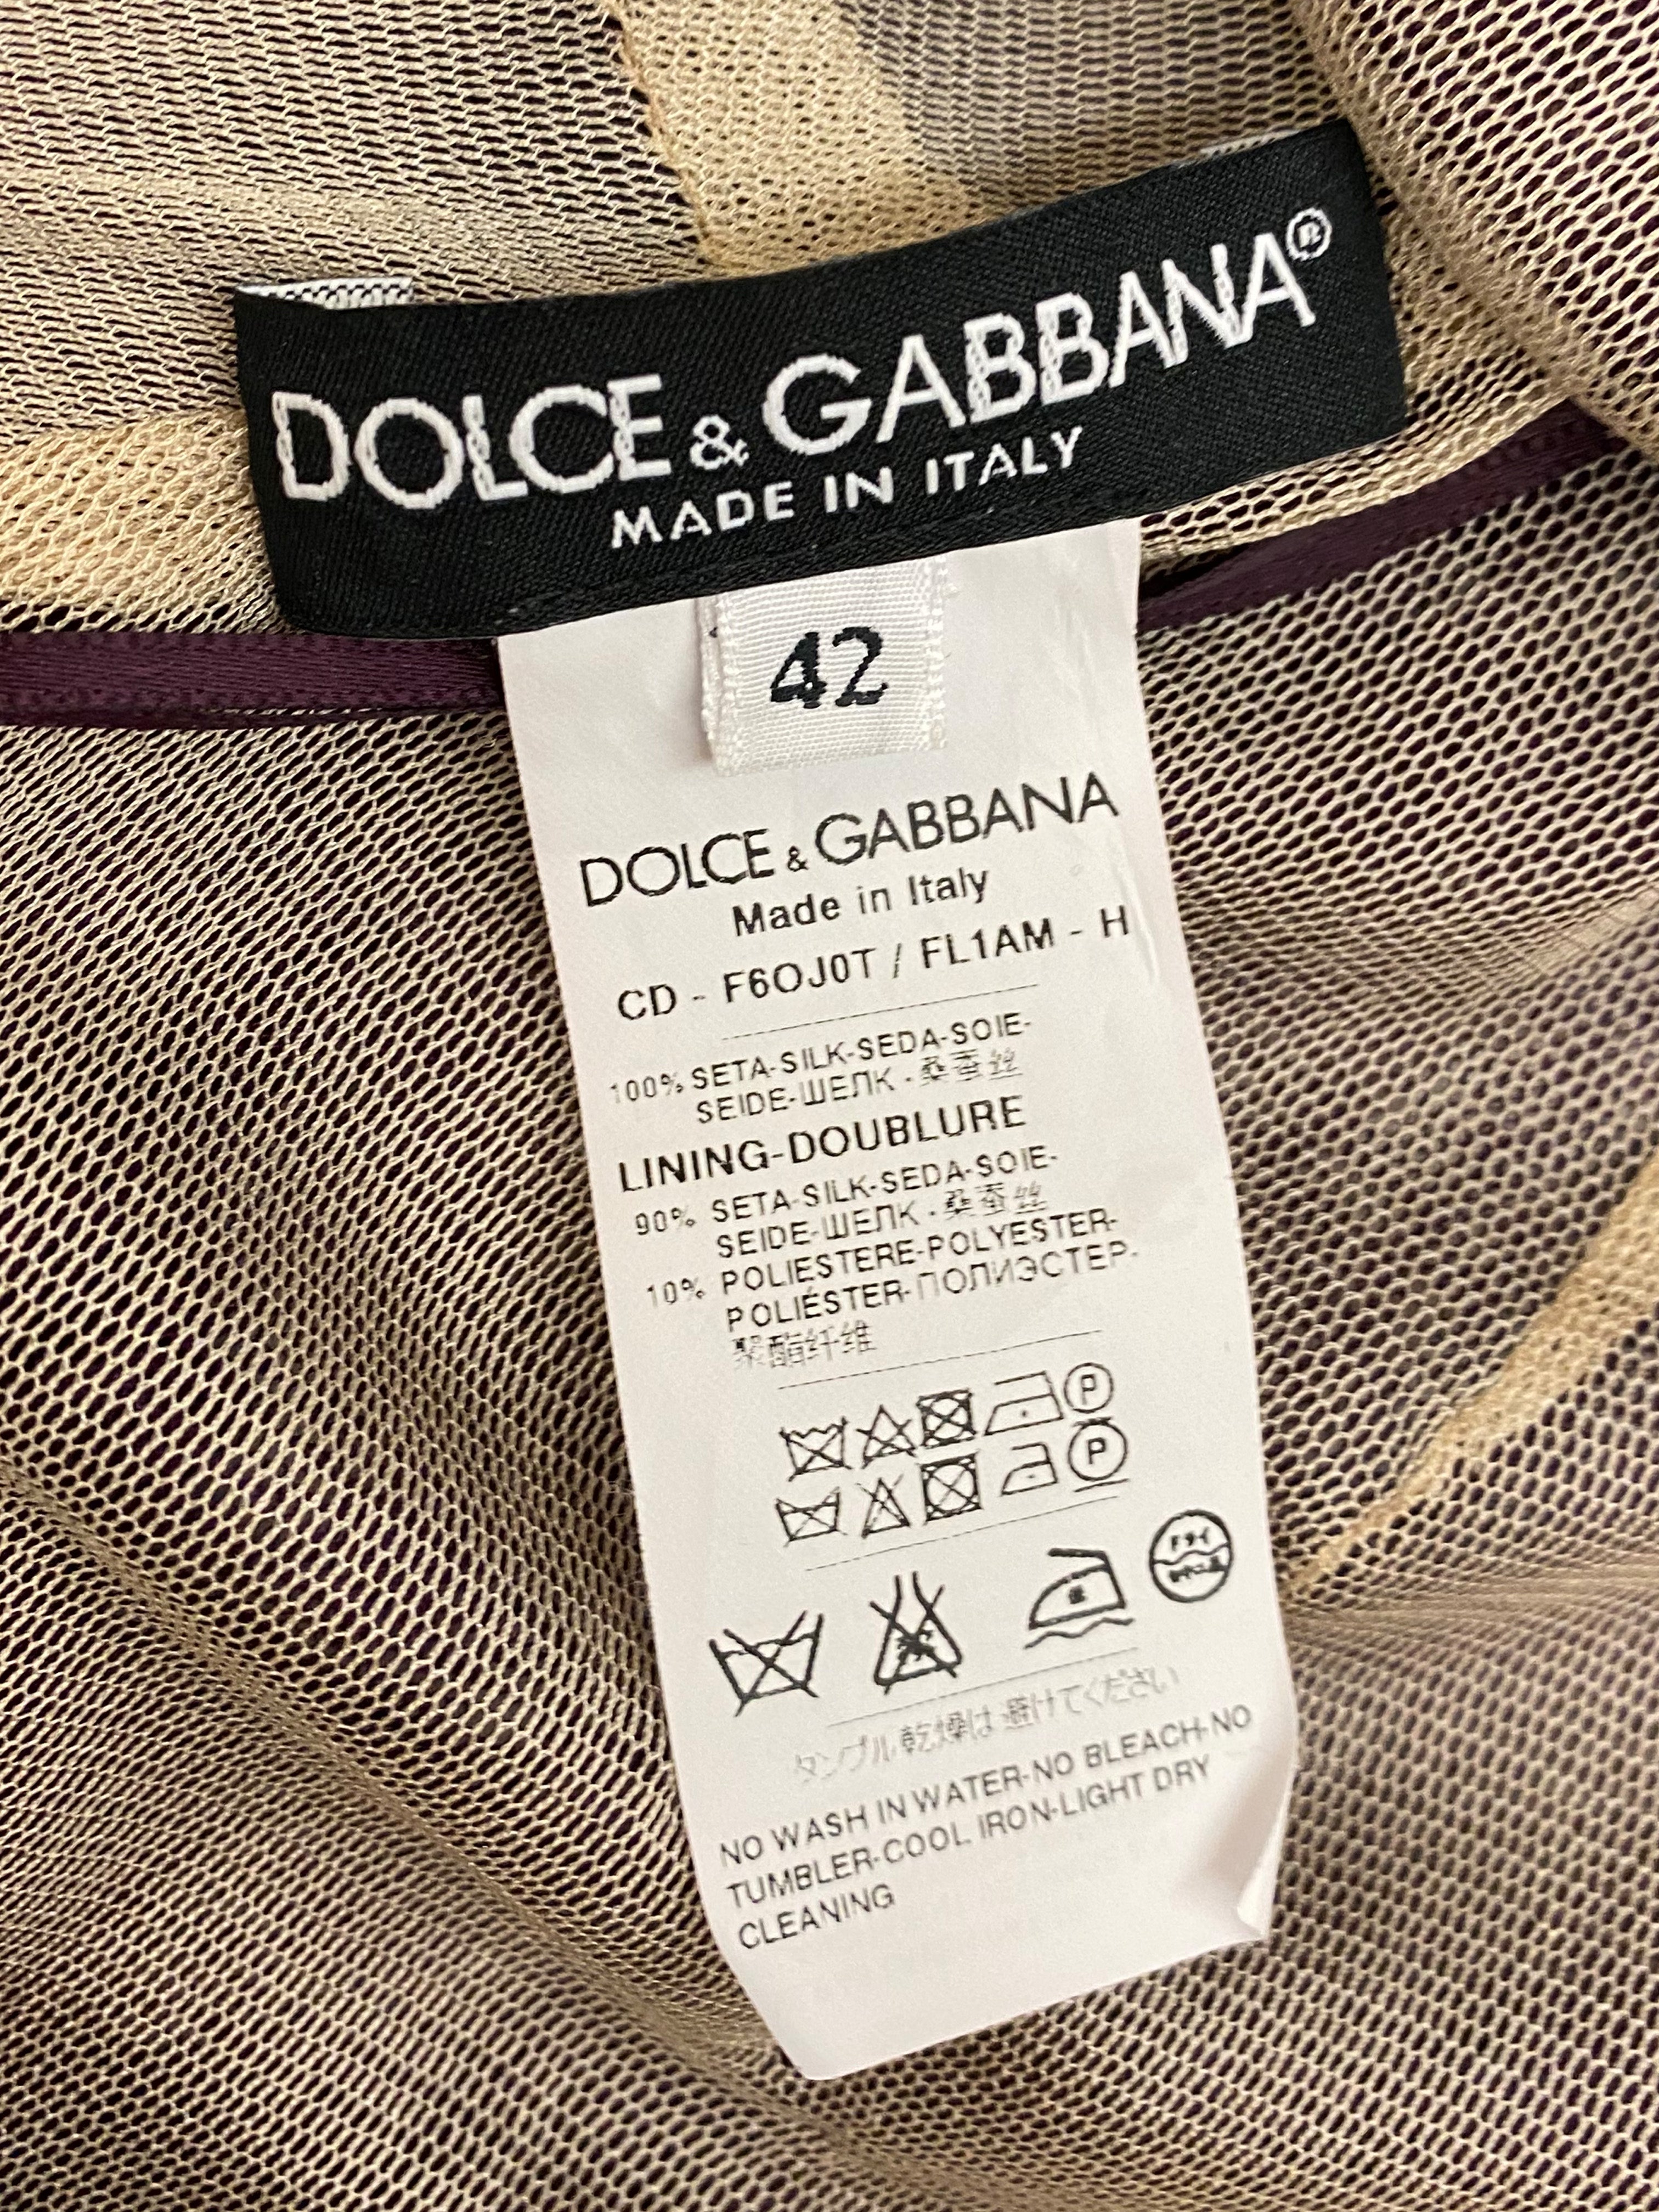 Dolce and Gabbana 2000s Purple Organza Ruched Dress